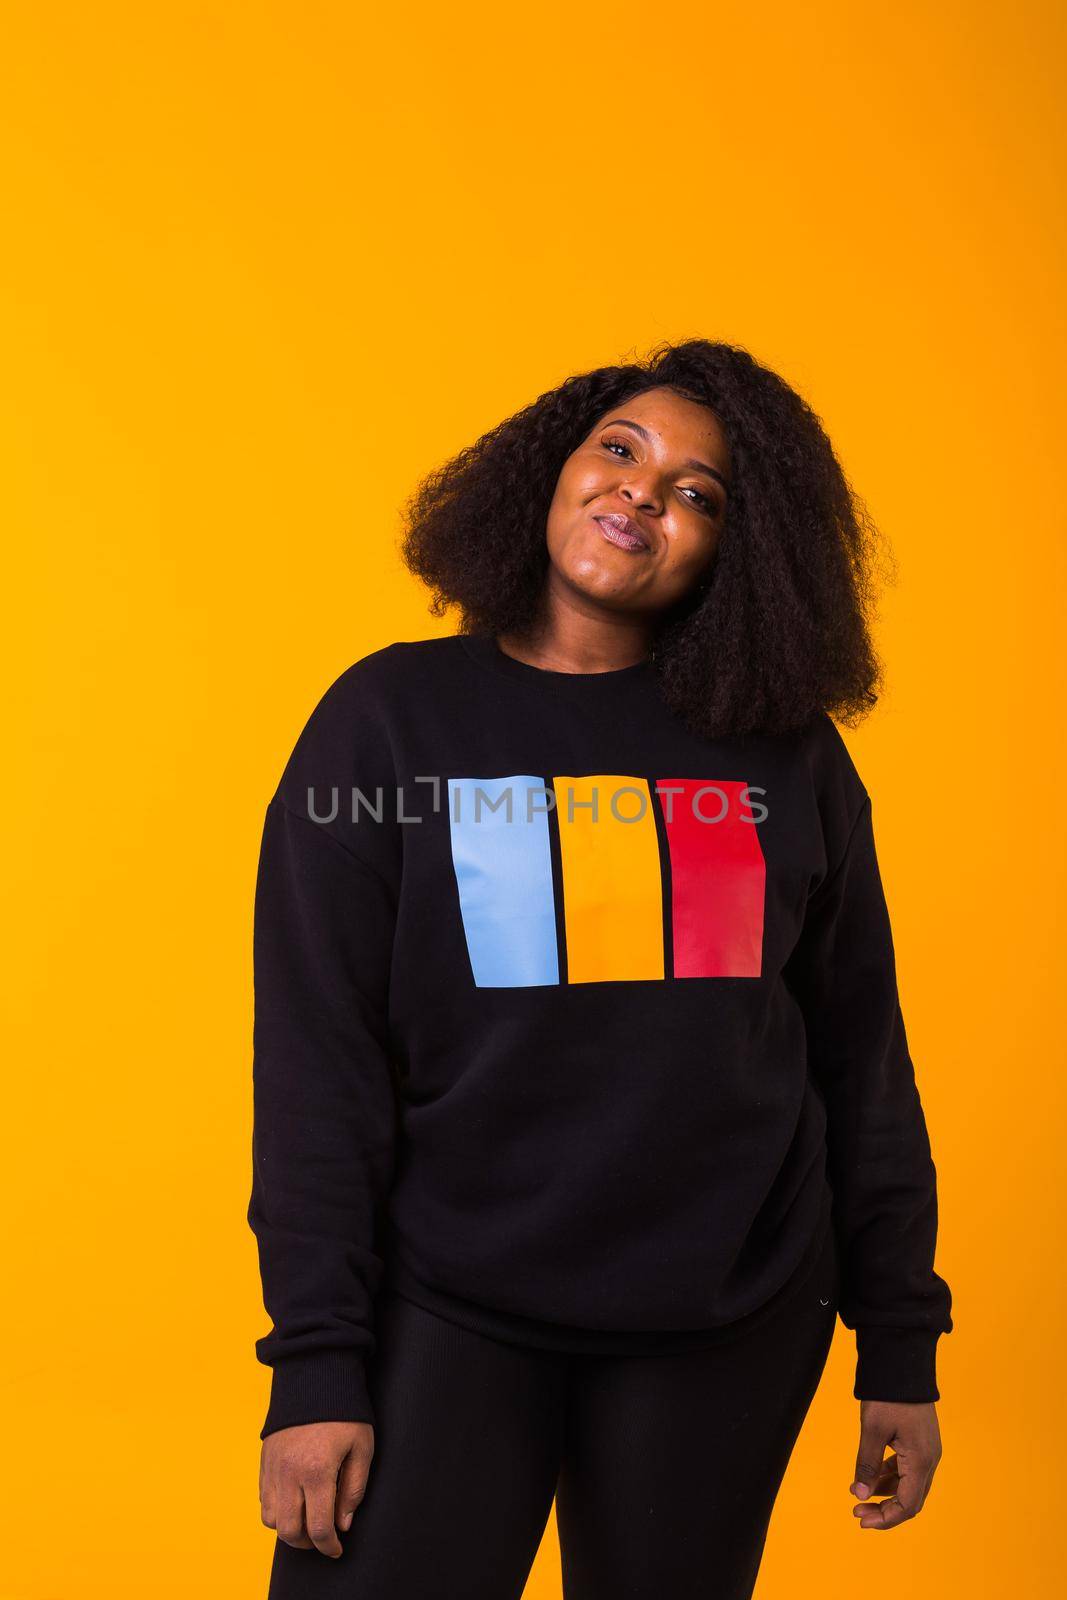 Youth street fashion concept - Confident sexy black woman in stylish sweatshirt having fun on yellow background. by Satura86